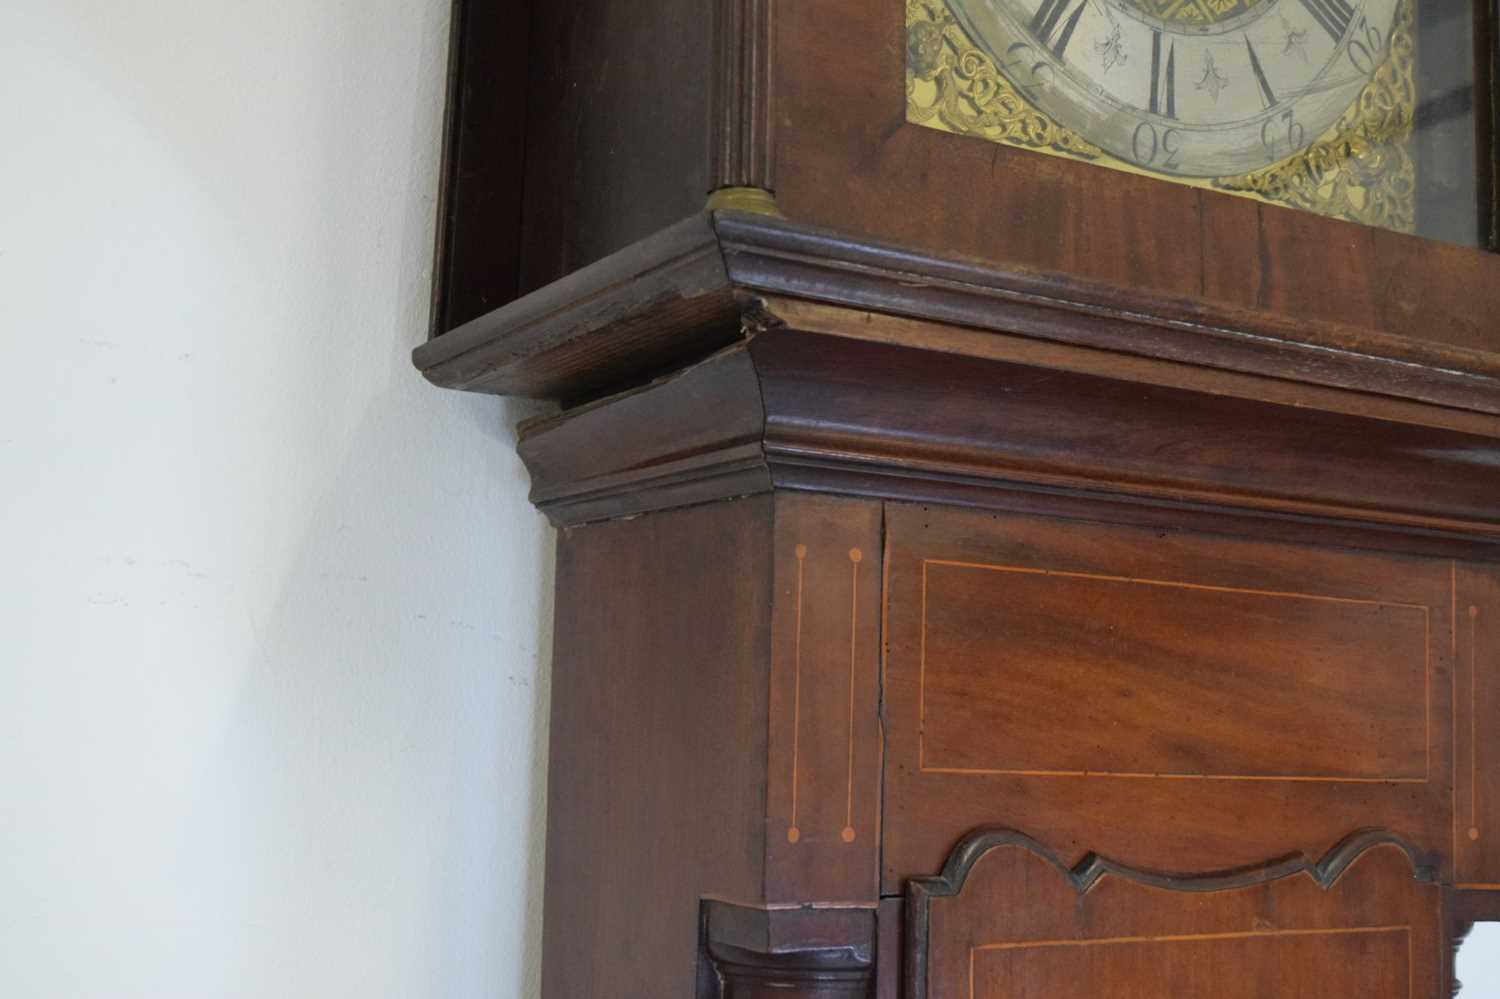 Early 19th Century inlaid mahogany cased 8-day brass dial longcase clock - Richard Hornby, Oldham - Image 2 of 14